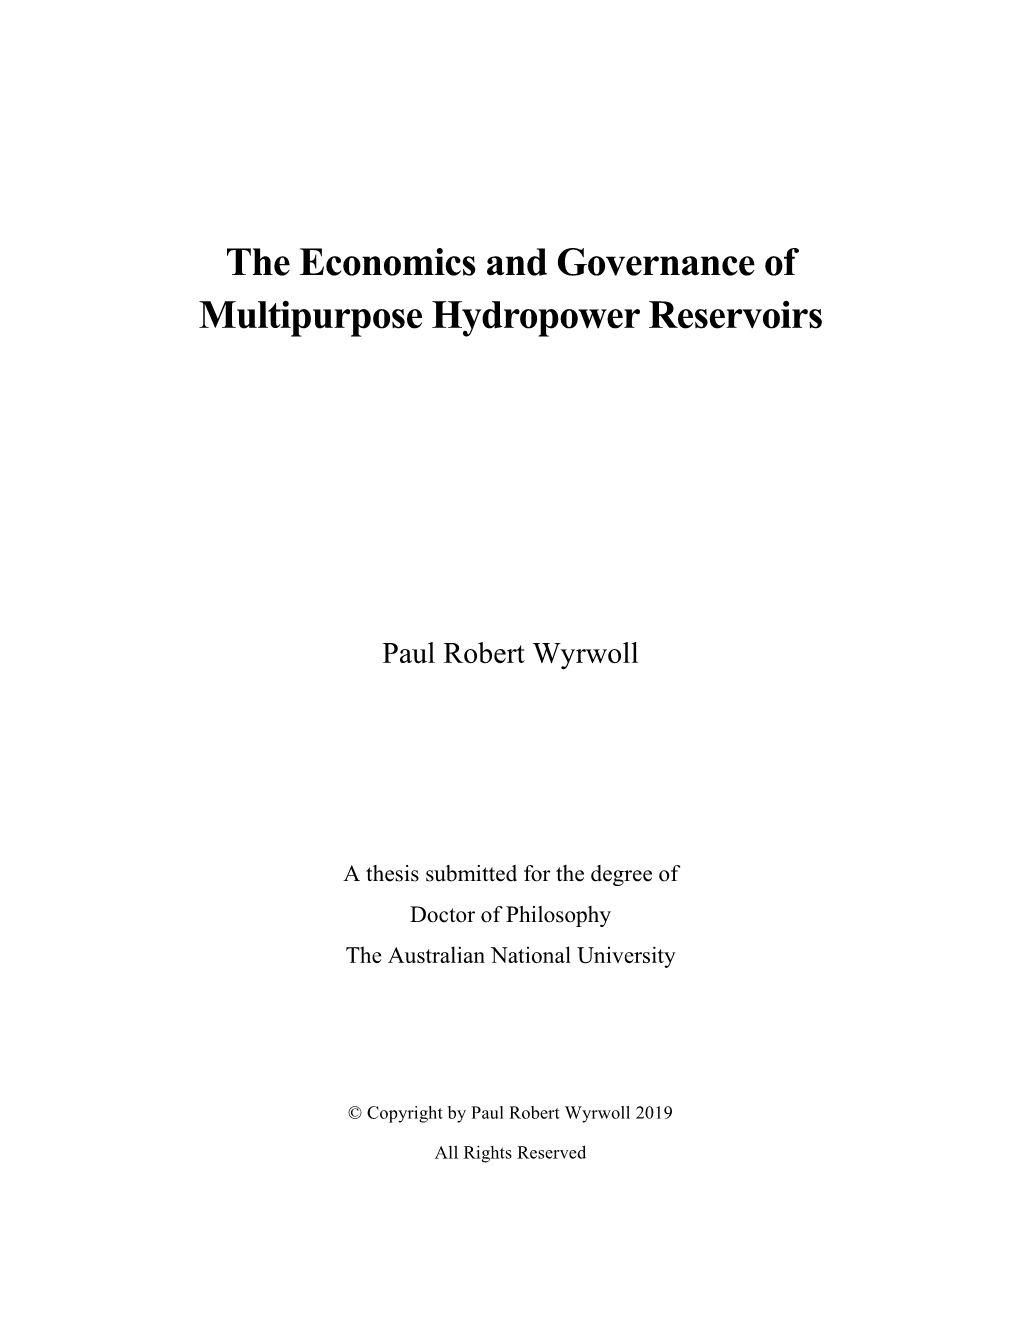 The Economics and Governance of Multipurpose Hydropower Reservoirs